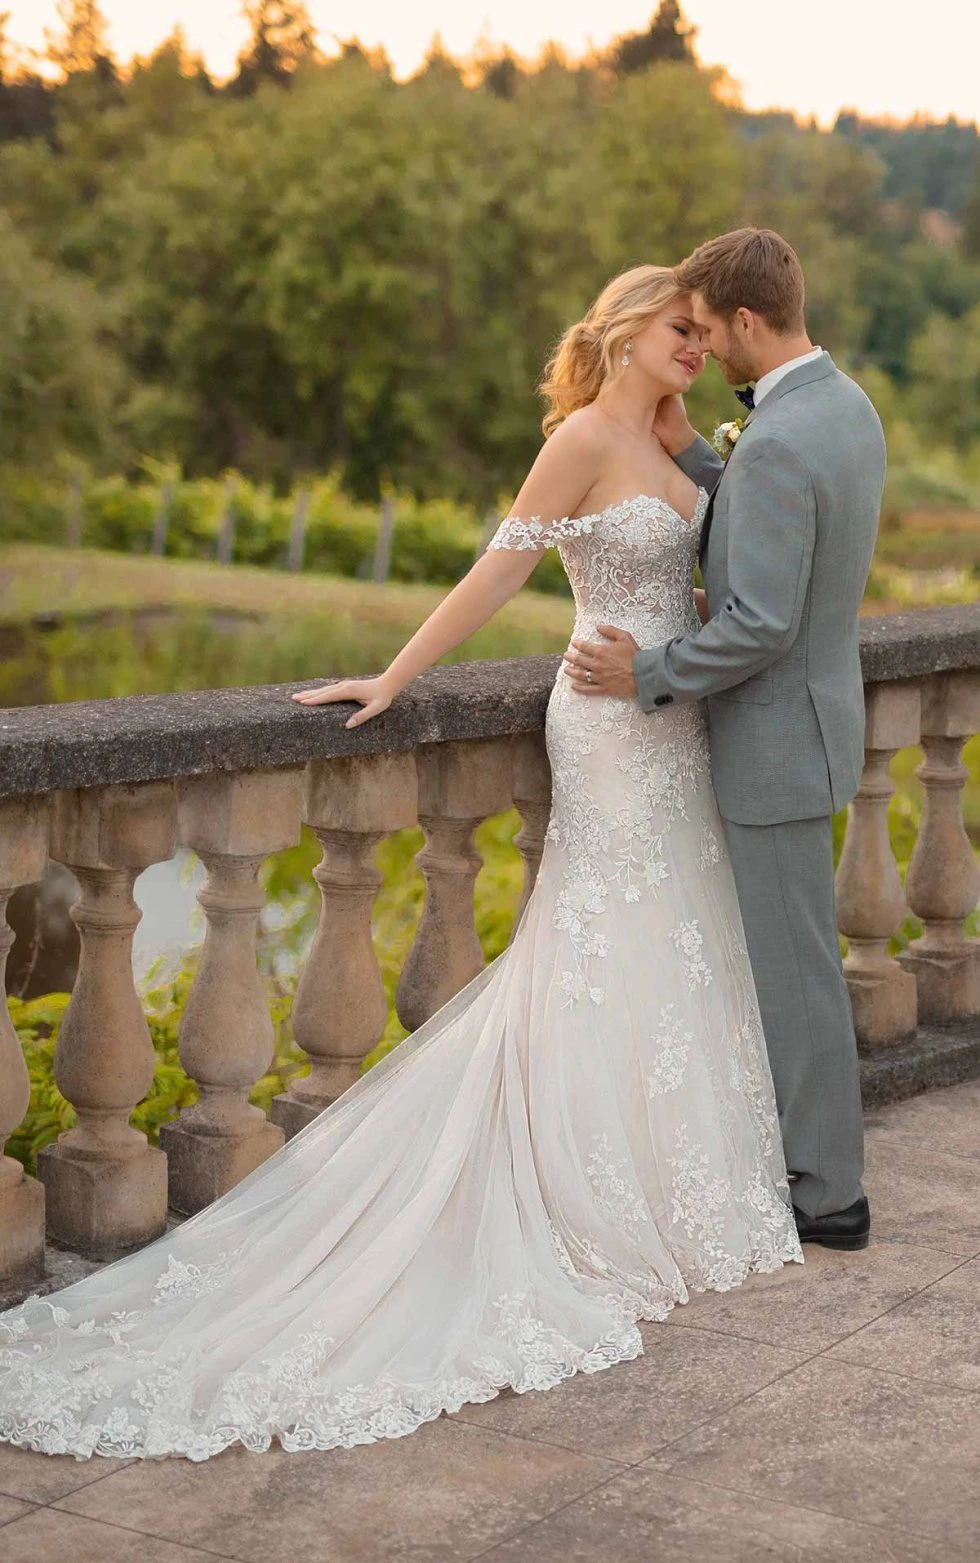  Silver and Ivory Wedding Dress